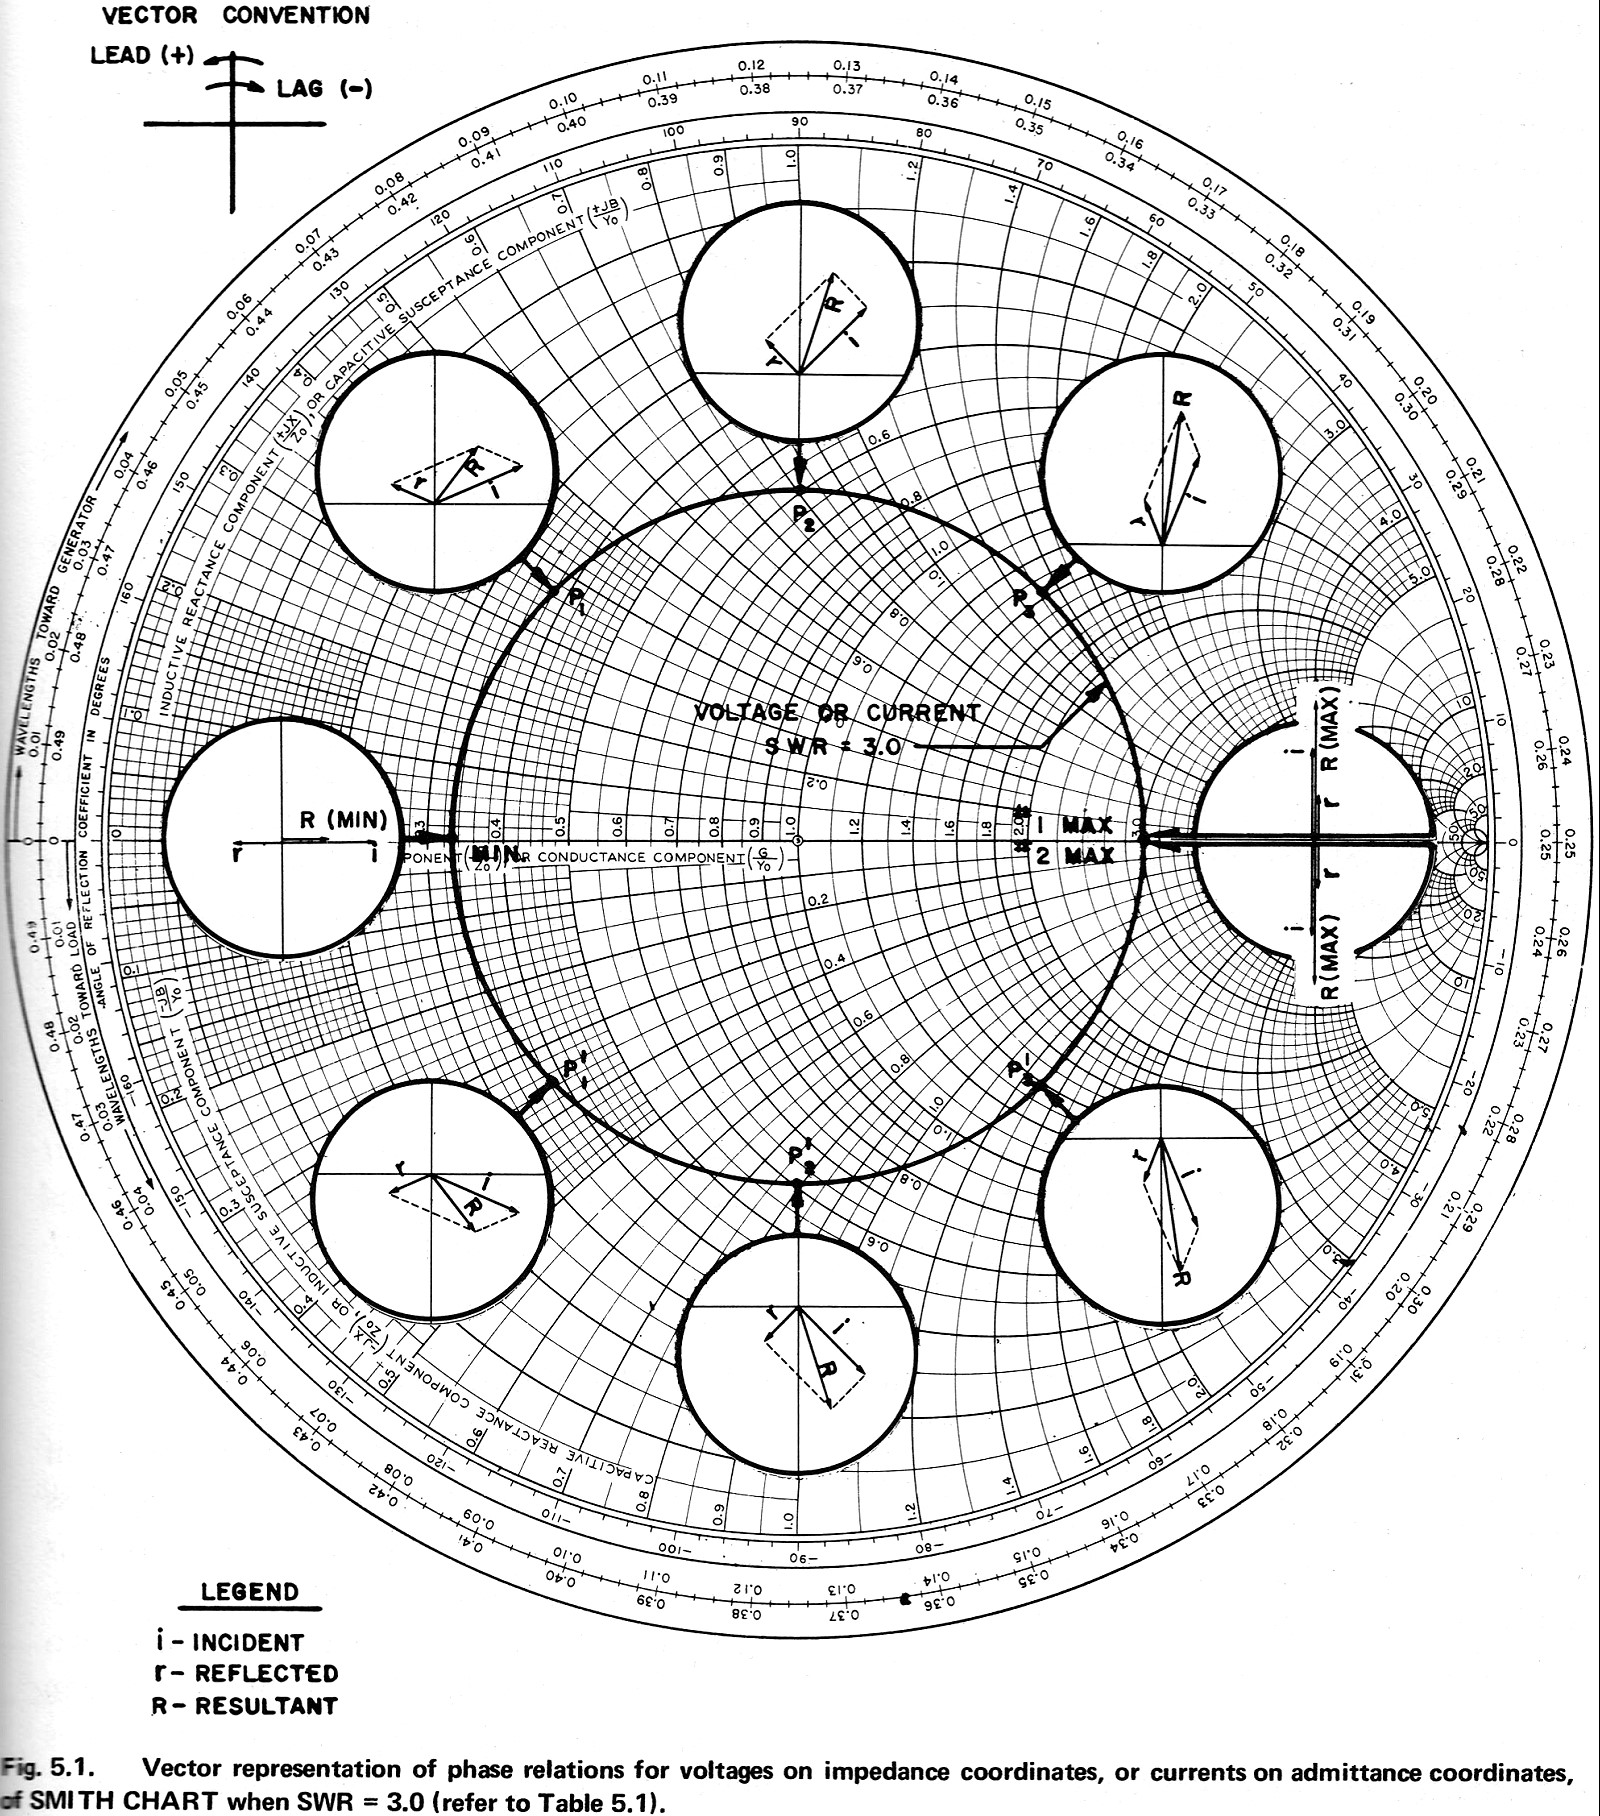 Picture of a Smith Chart